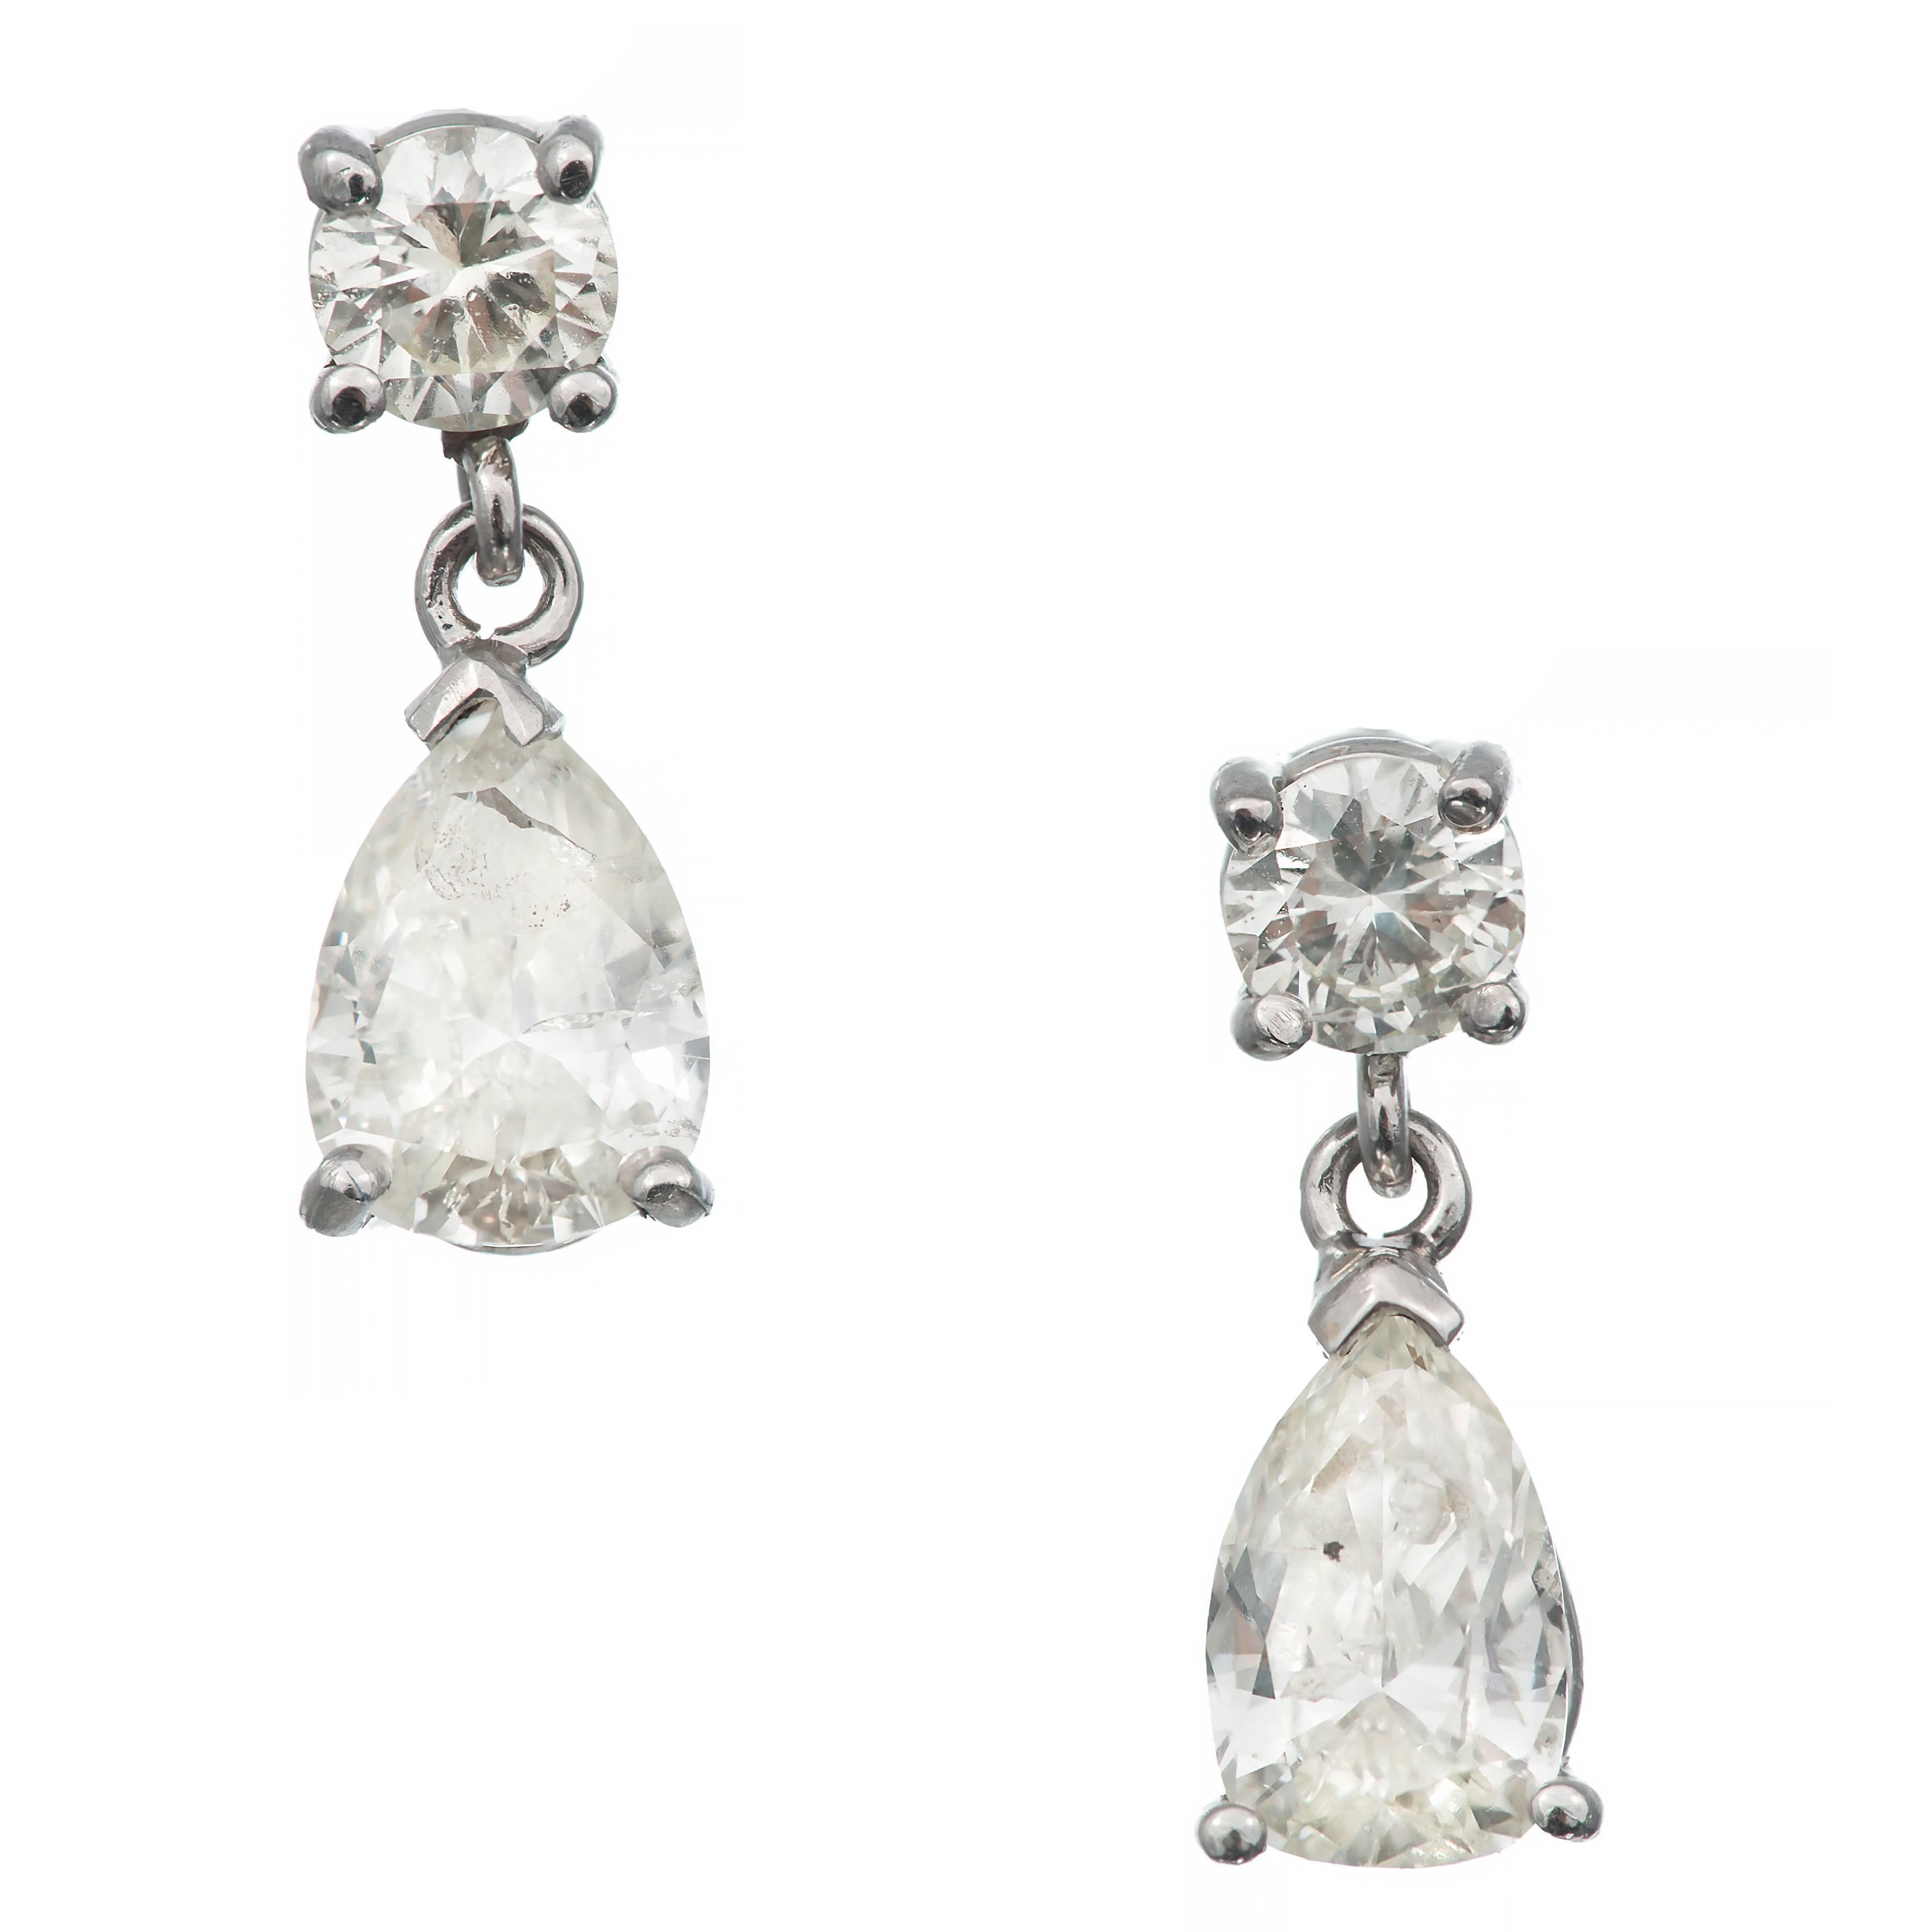 Mid-century 14k white gold dangle earrings with round full cut diamond tops and pear shaped diamond dangles. Circa 1960.

2 round diamonds, approx. total weight .39cts, H-I, SI1
2 pear diamonds, approx. total weight 1.10cts, H-I, SI2 – I1
14k white